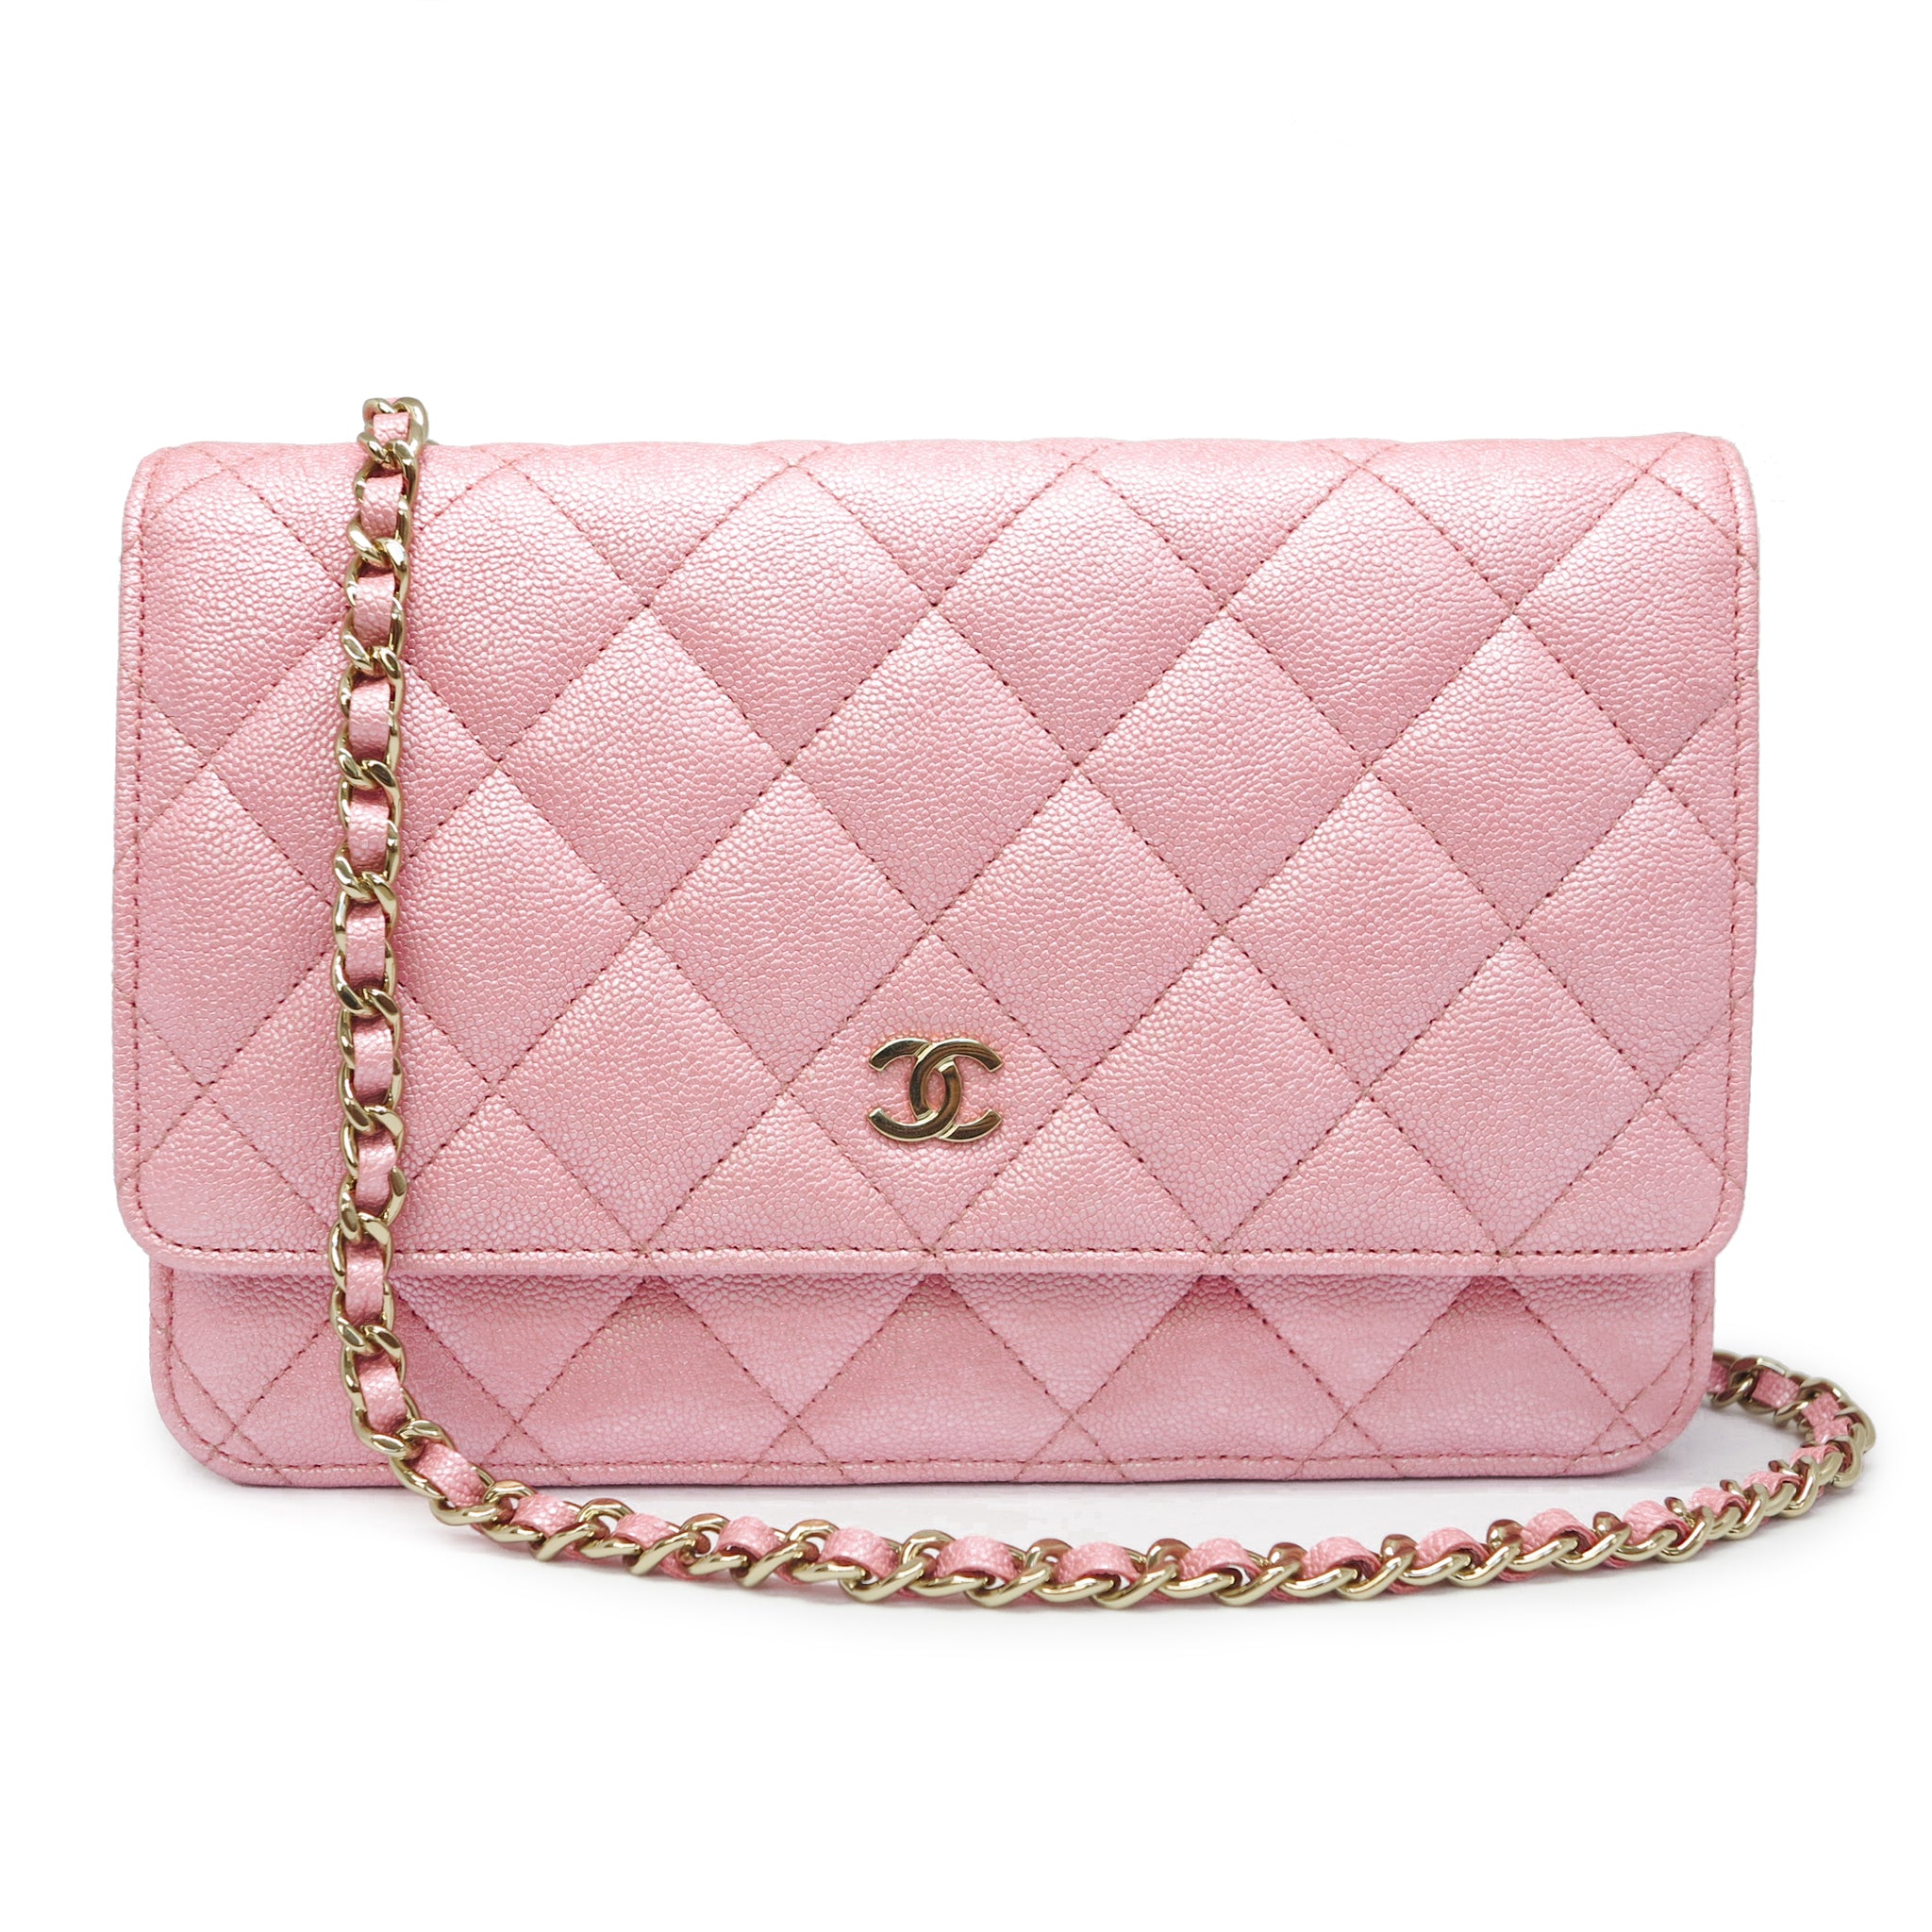 CHANEL Wallet On Chain WOC in Iridescent Pink Caviar | Dearluxe